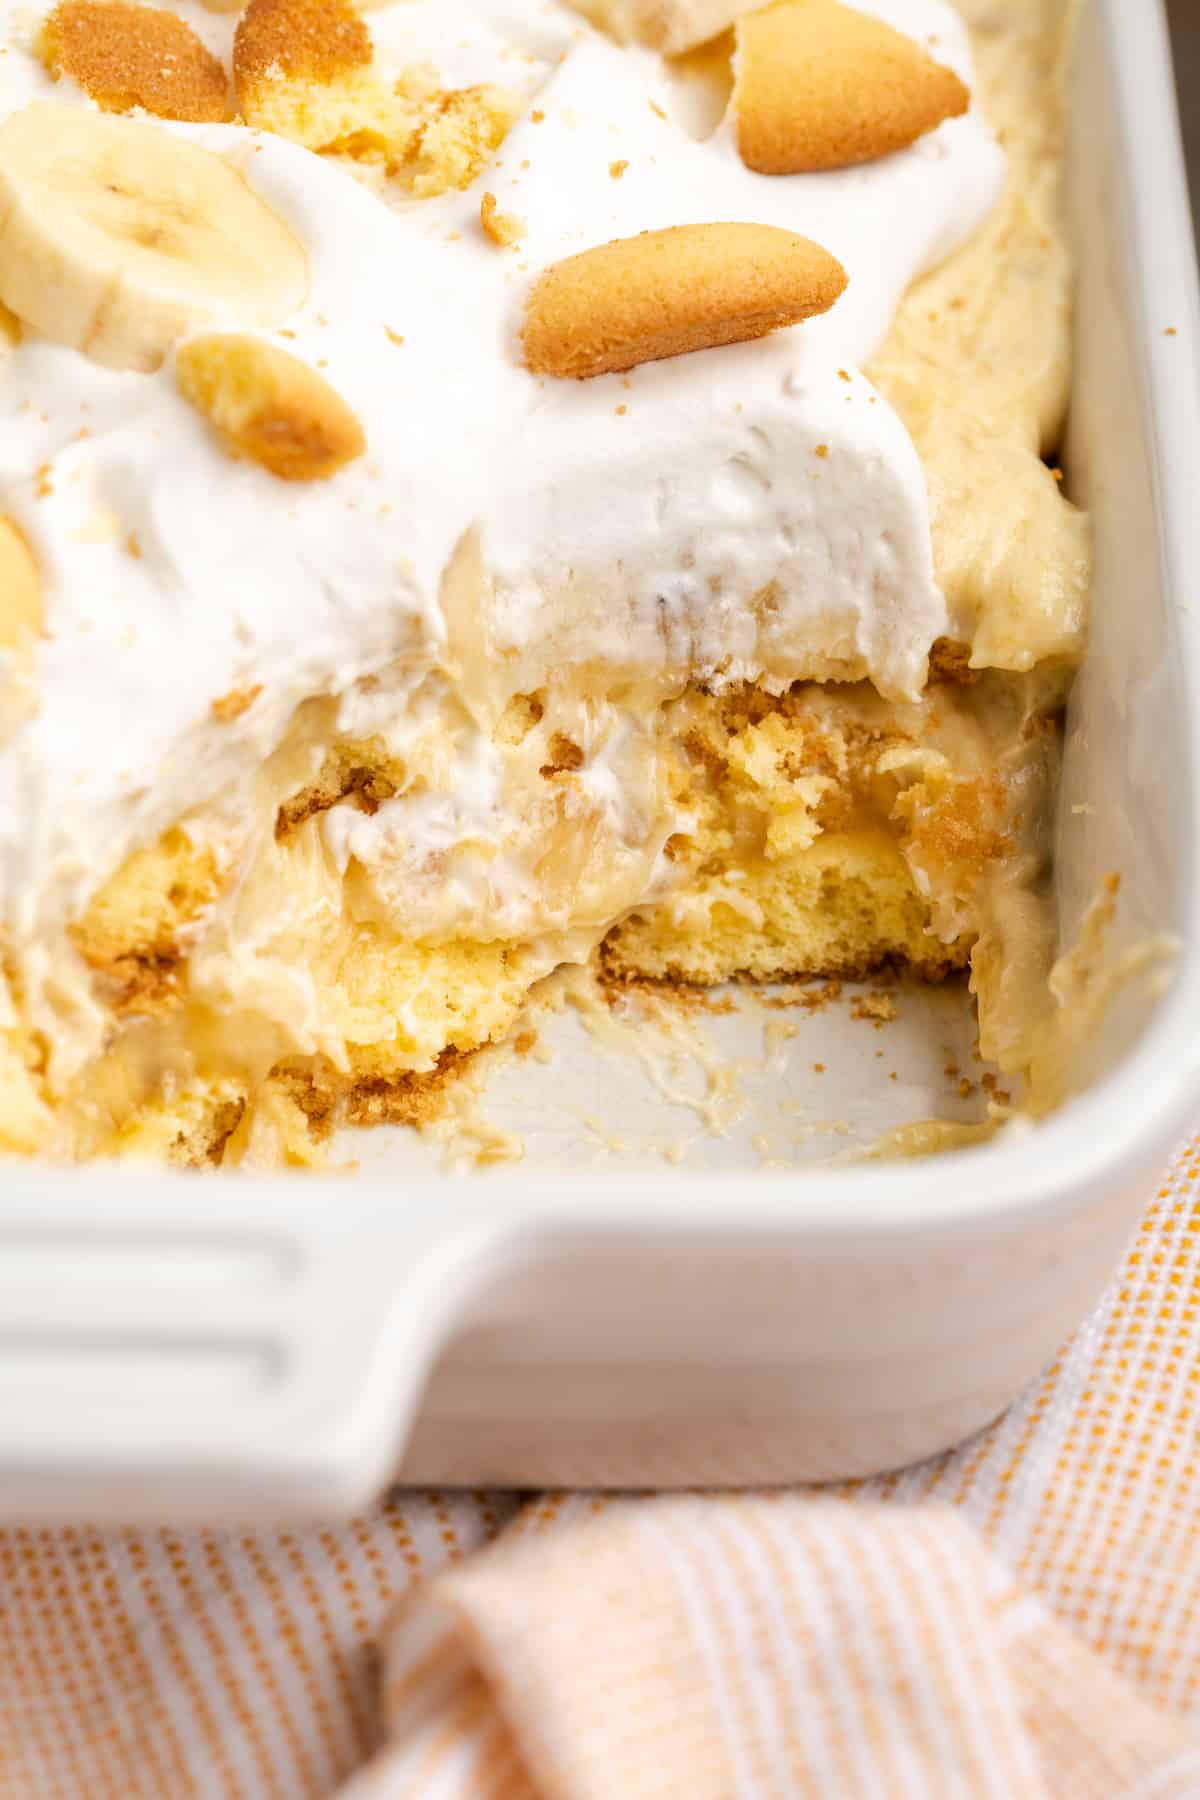 Vegan banana pudding in baking dish, with portion removed to show layers